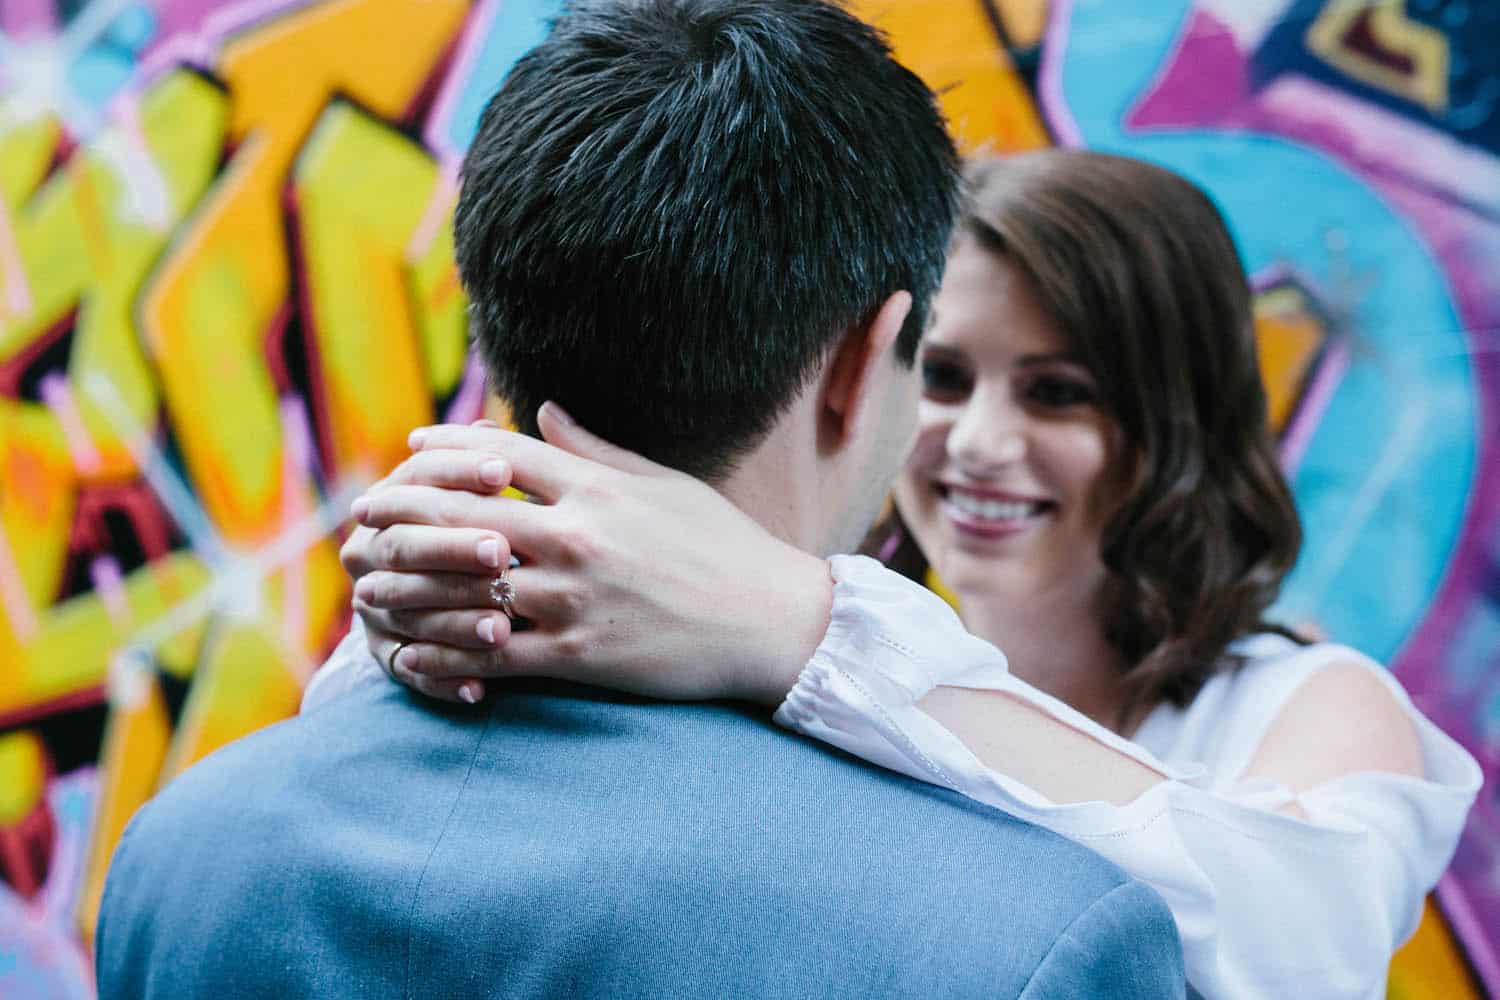 Engagement Photographer Melbourne Graffiti Walk Hosier Lane and Hardware Lane Engagement Shoot with Quila and Dave 3